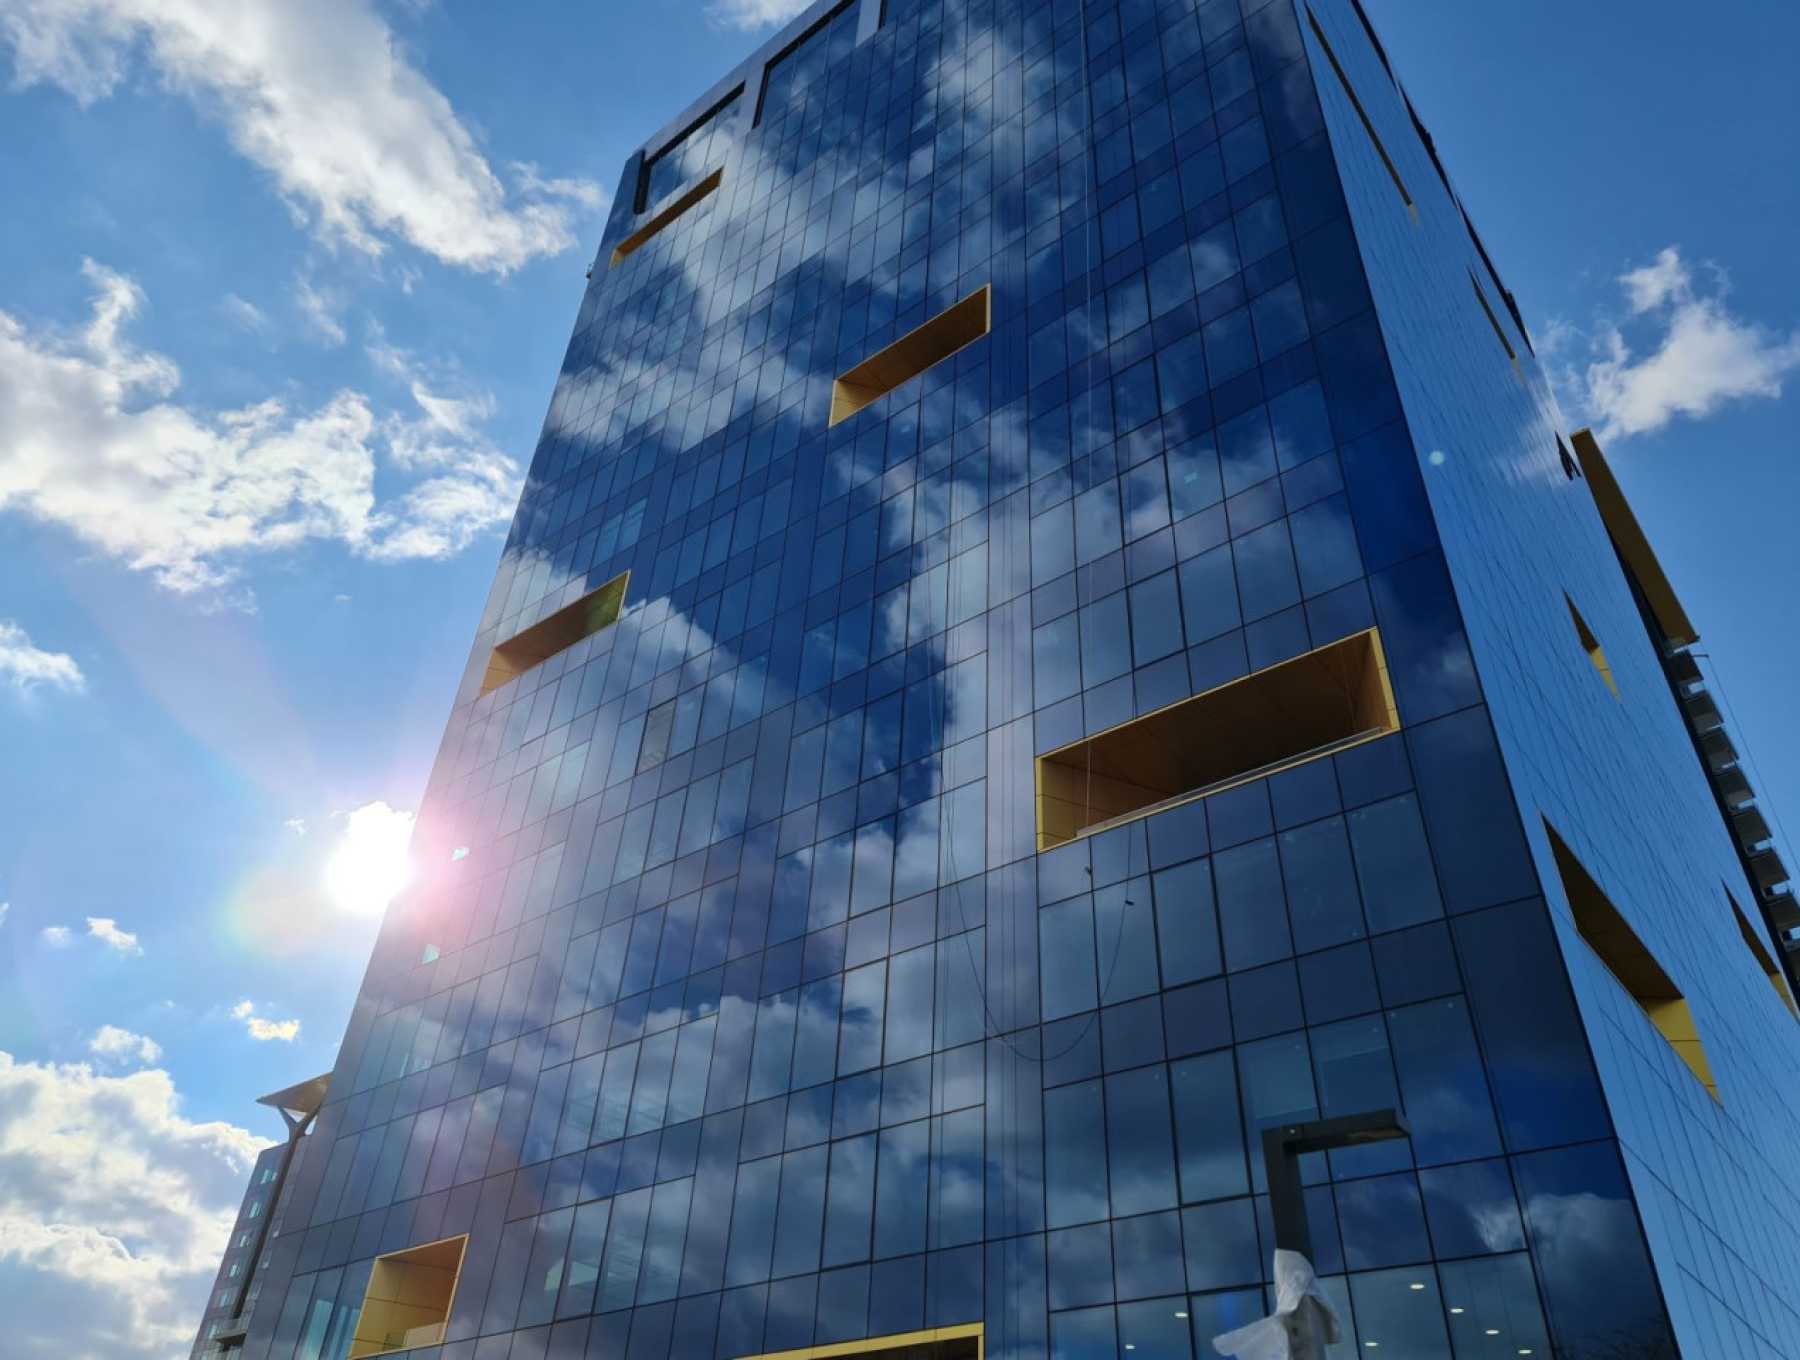 Egis Pharmaceuticals has relocated its main offices at One Tower building